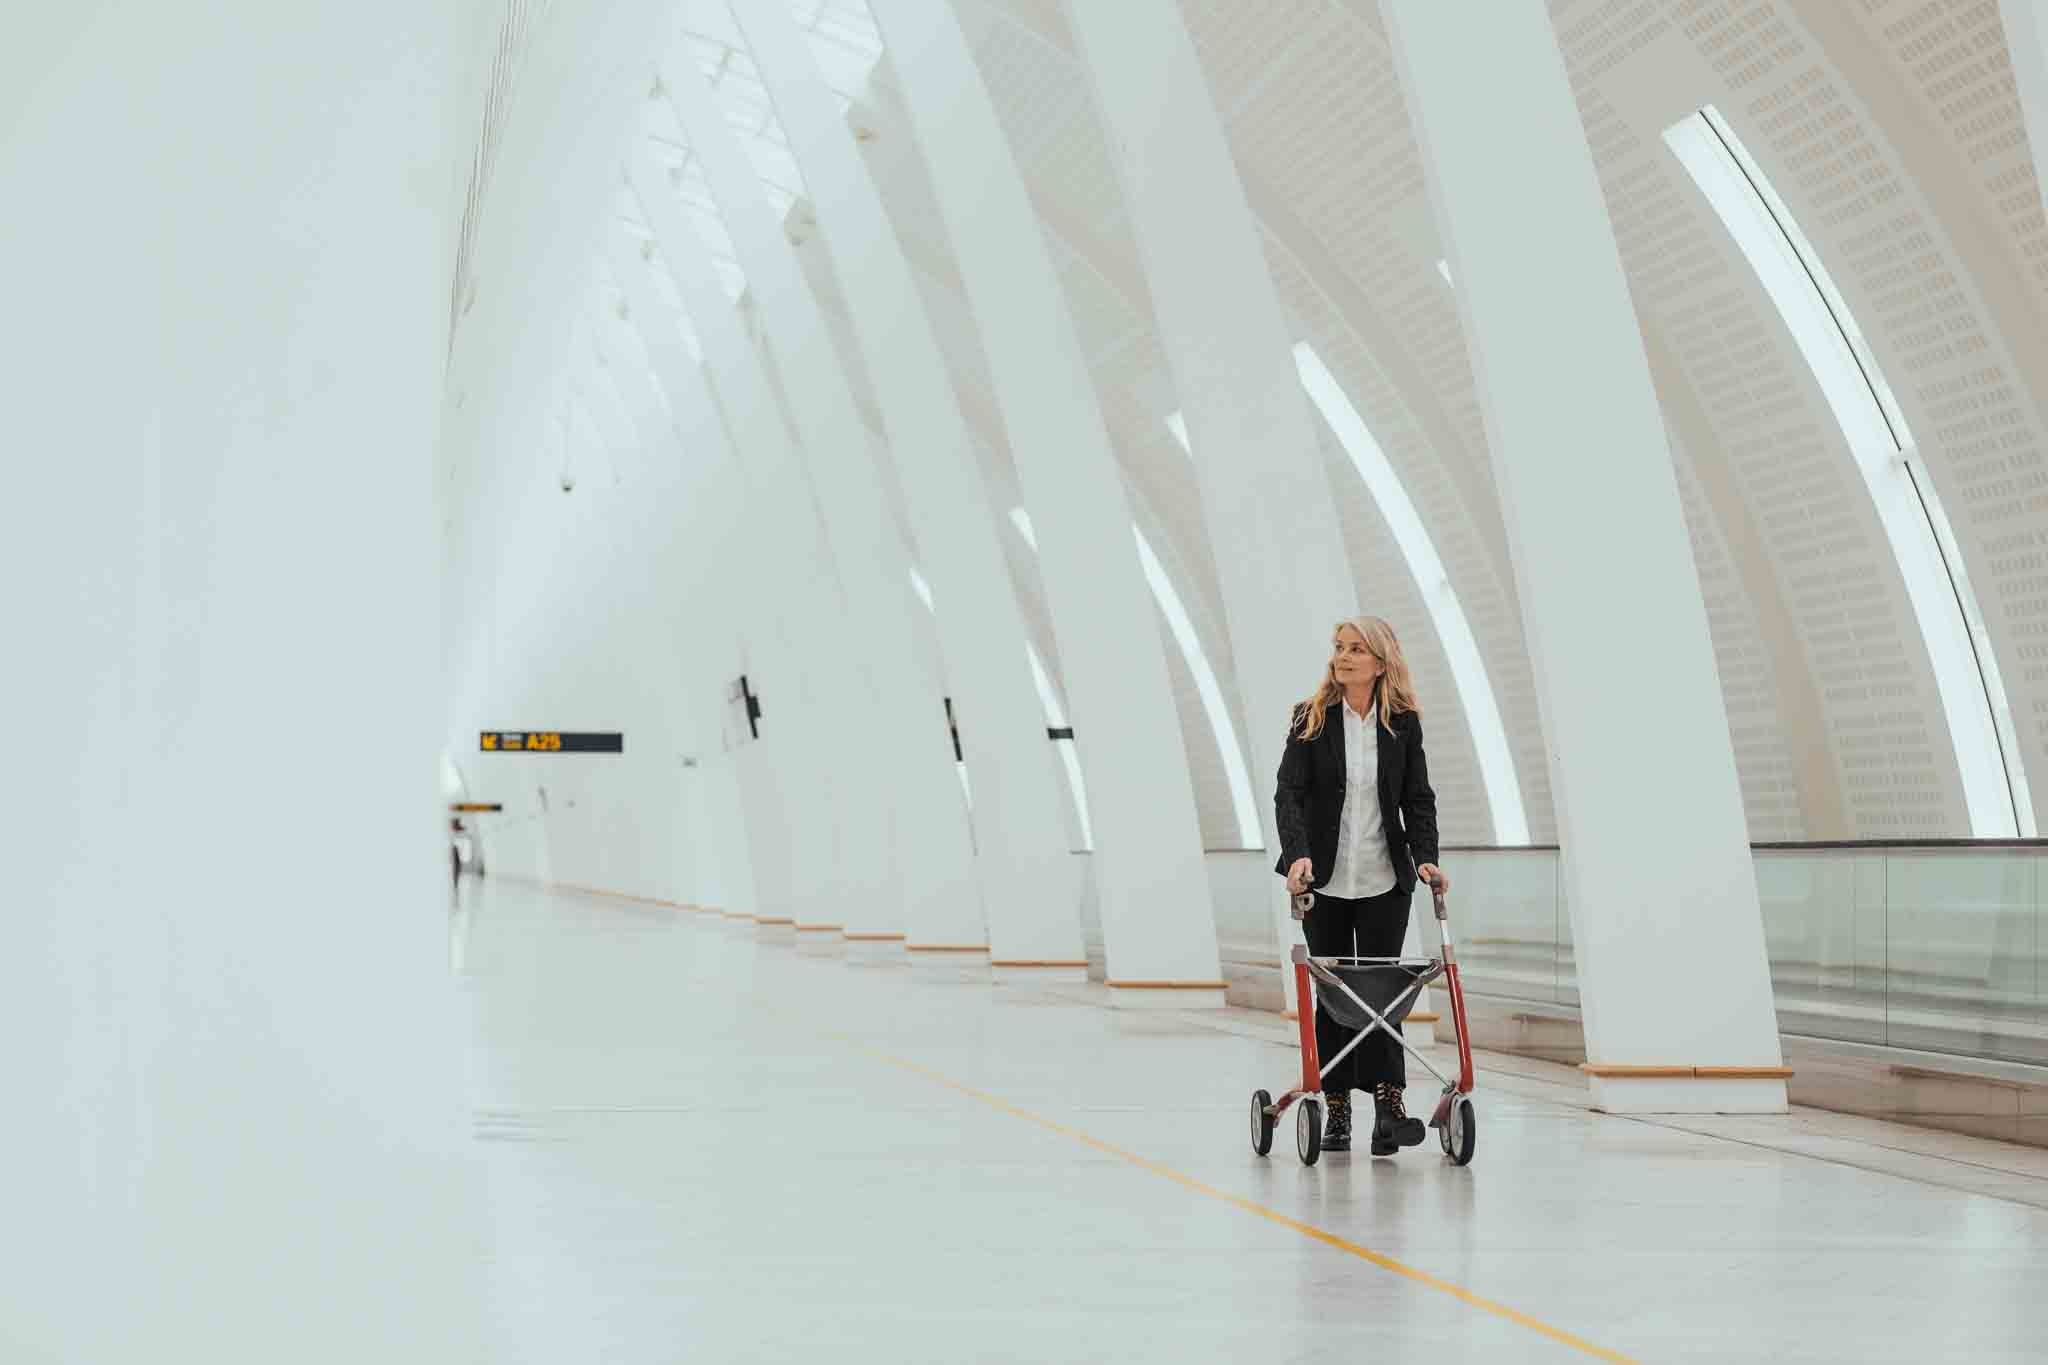 A woman walks with a modern lightweight 'byACRE Ultralight' walking frame inside a modern train station with white arches.